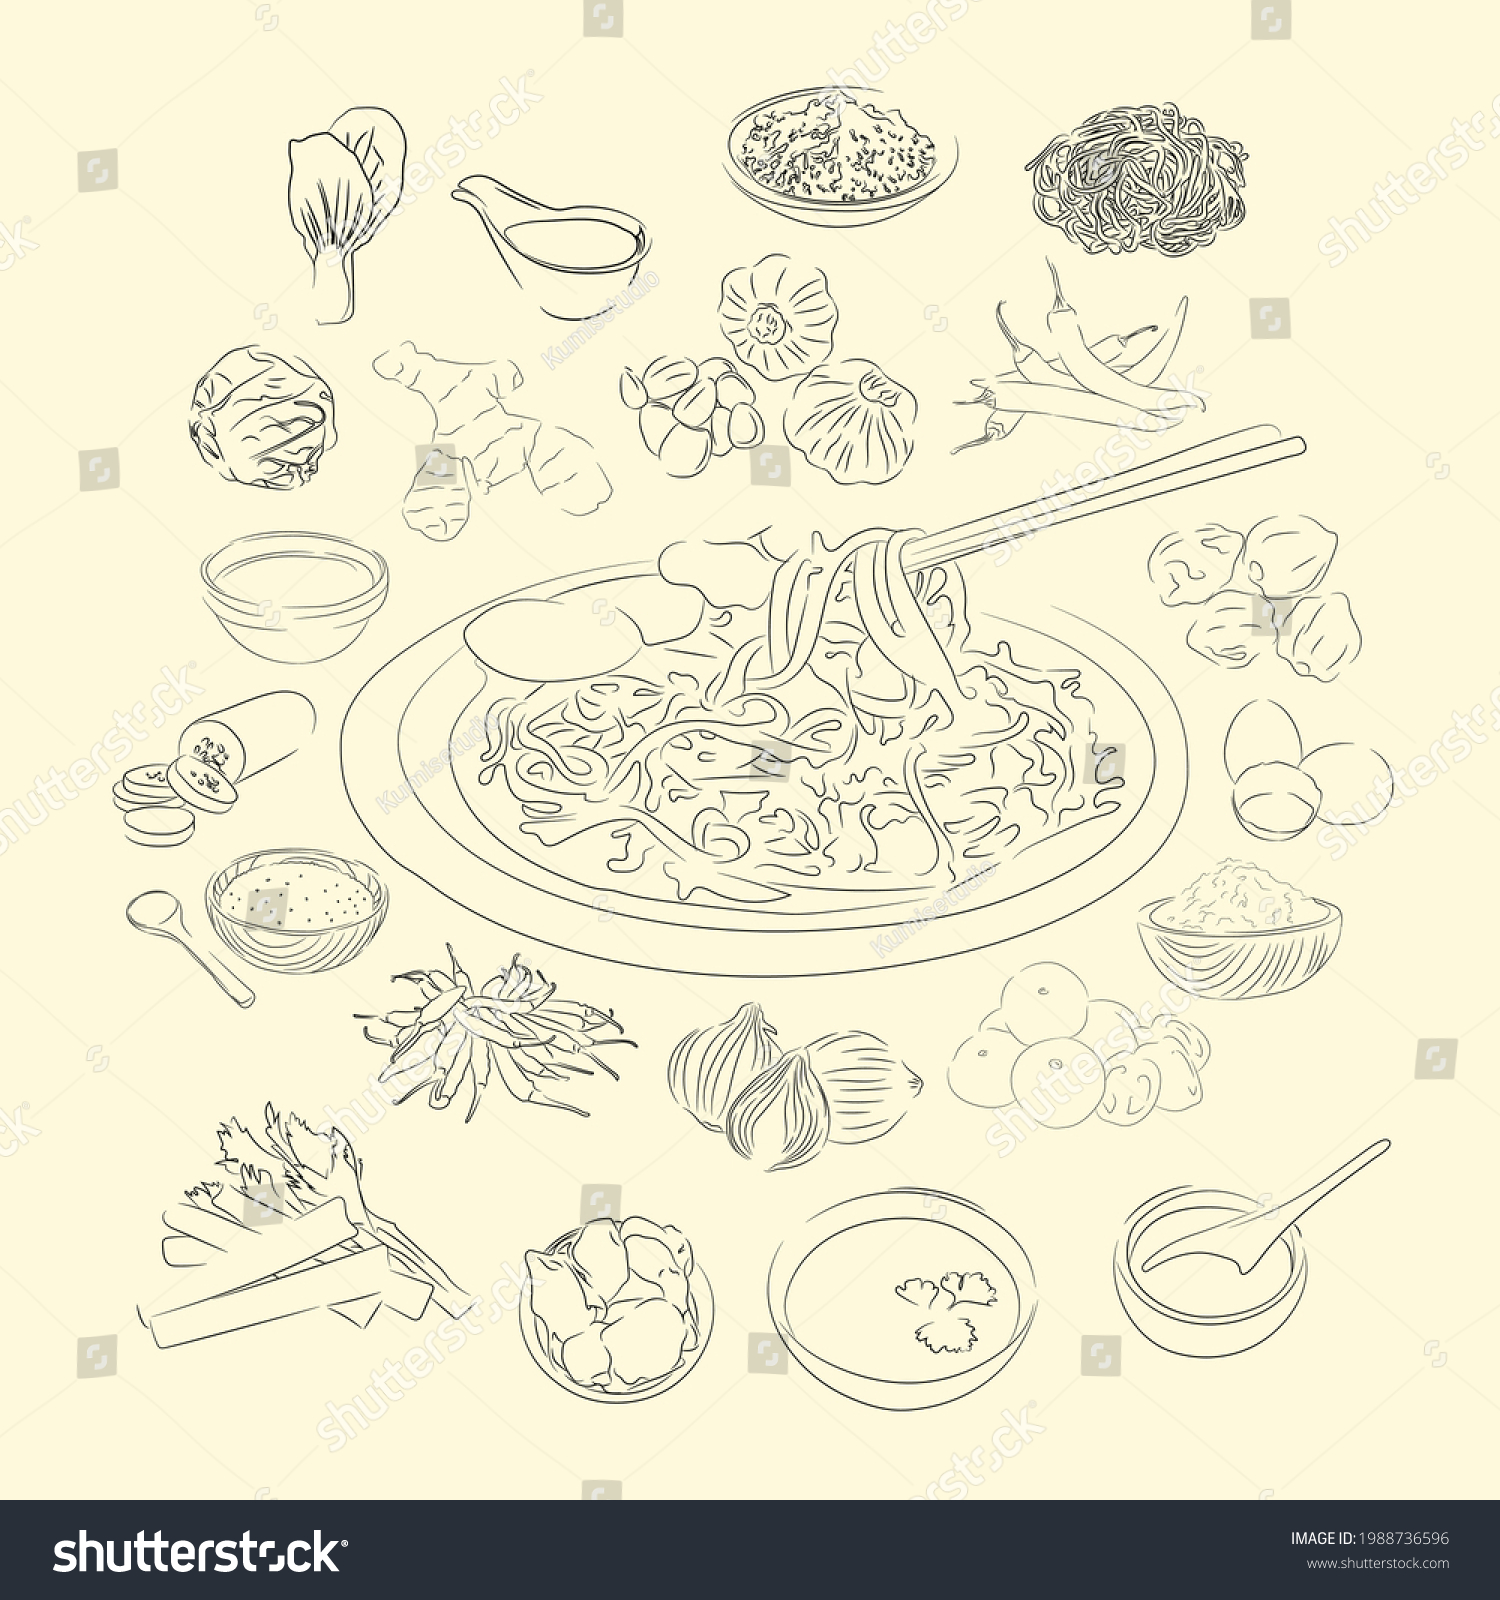 SVG of Mie Aceh And Ingredients Illustration Sketch Style, Traditional Food From Aceh, Good to use for restaurant menu, Indonesian food recipe book, and food content. svg